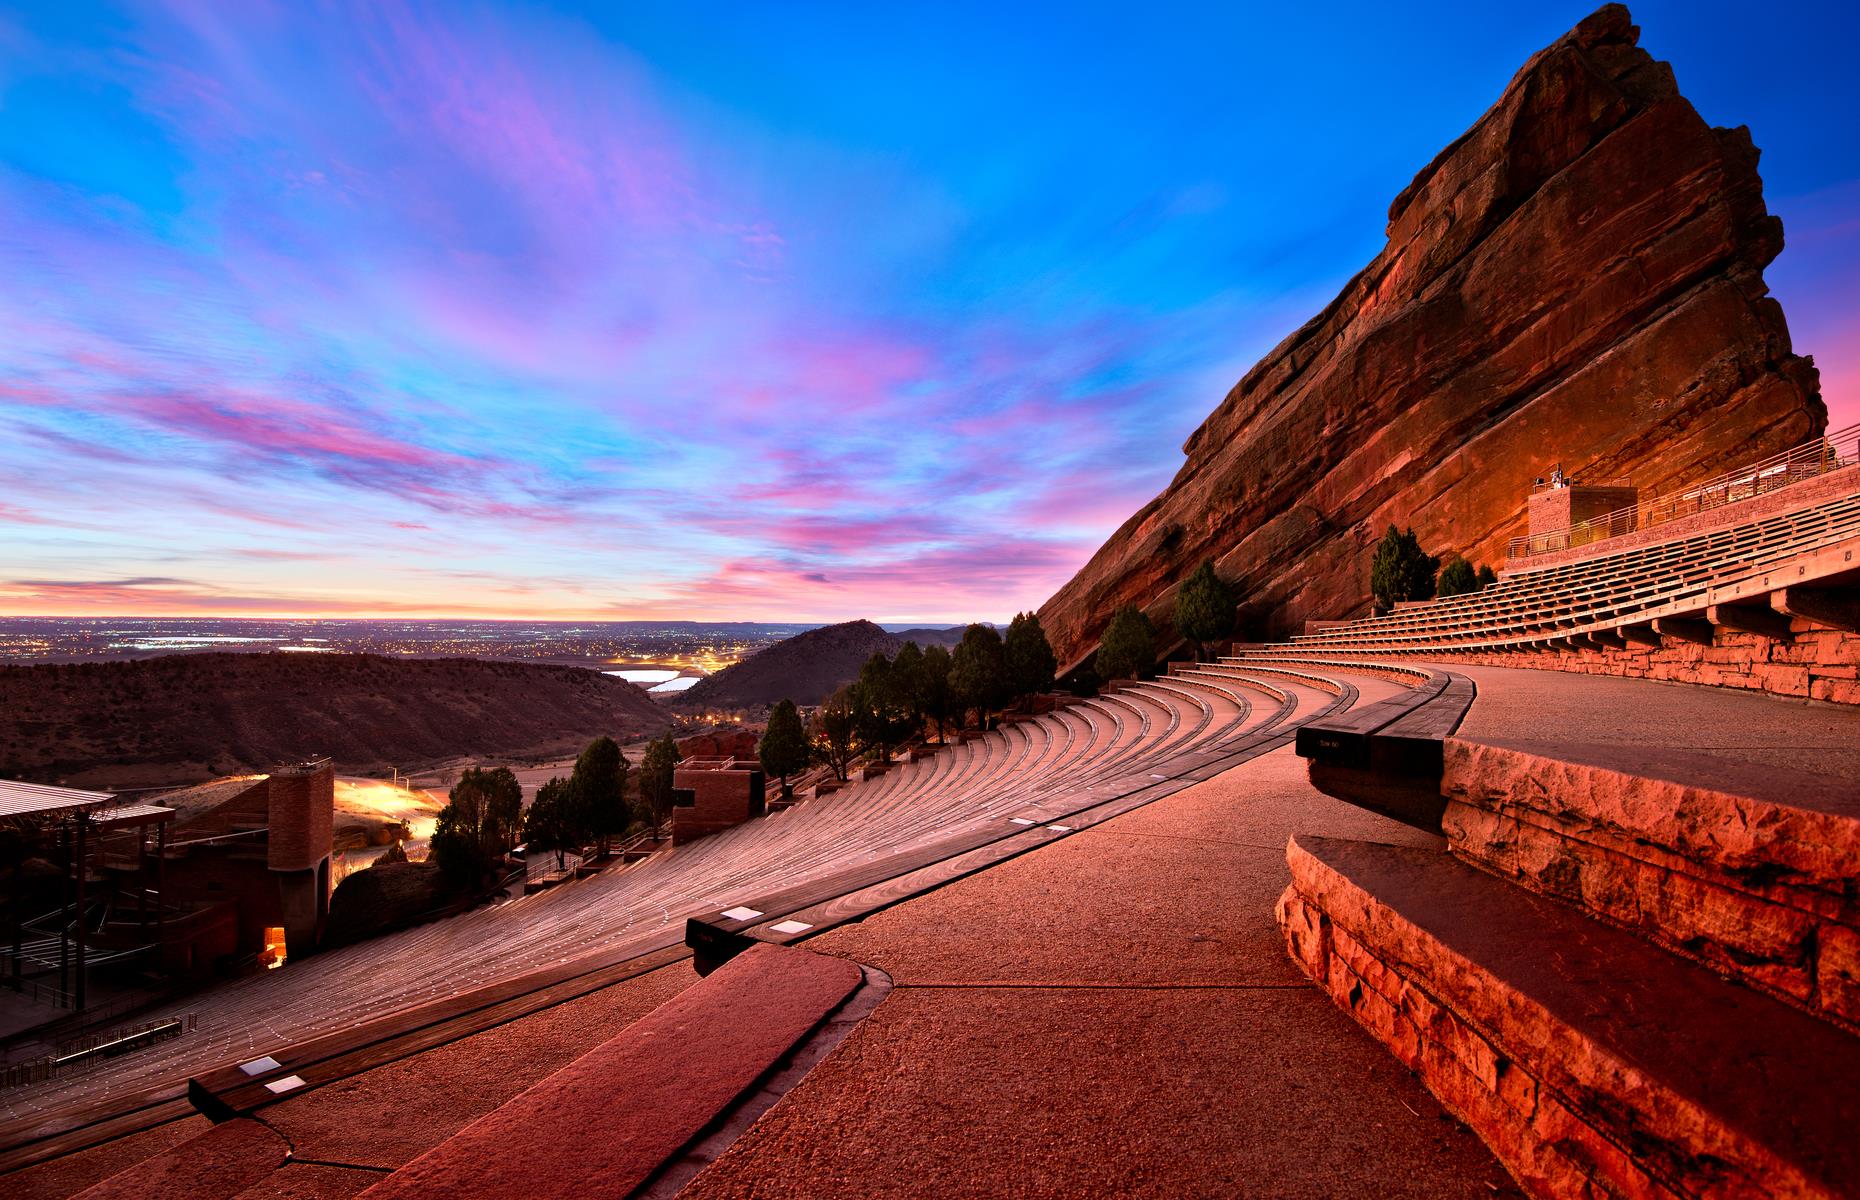 <p>It doesn’t really matter what gig you see at the <a href="https://www.redrocksonline.com/">Red Rocks Amphitheater</a>, tucked between two sandstone monoliths a little outside Denver. In a setting like this, with views of alpine valleys and mountains, it’s guaranteed to be spectacular. Unsurprisingly, though, it does attract some huge names, with U2 and The Beatles among those who have played in this acoustically perfect wonder.</p>